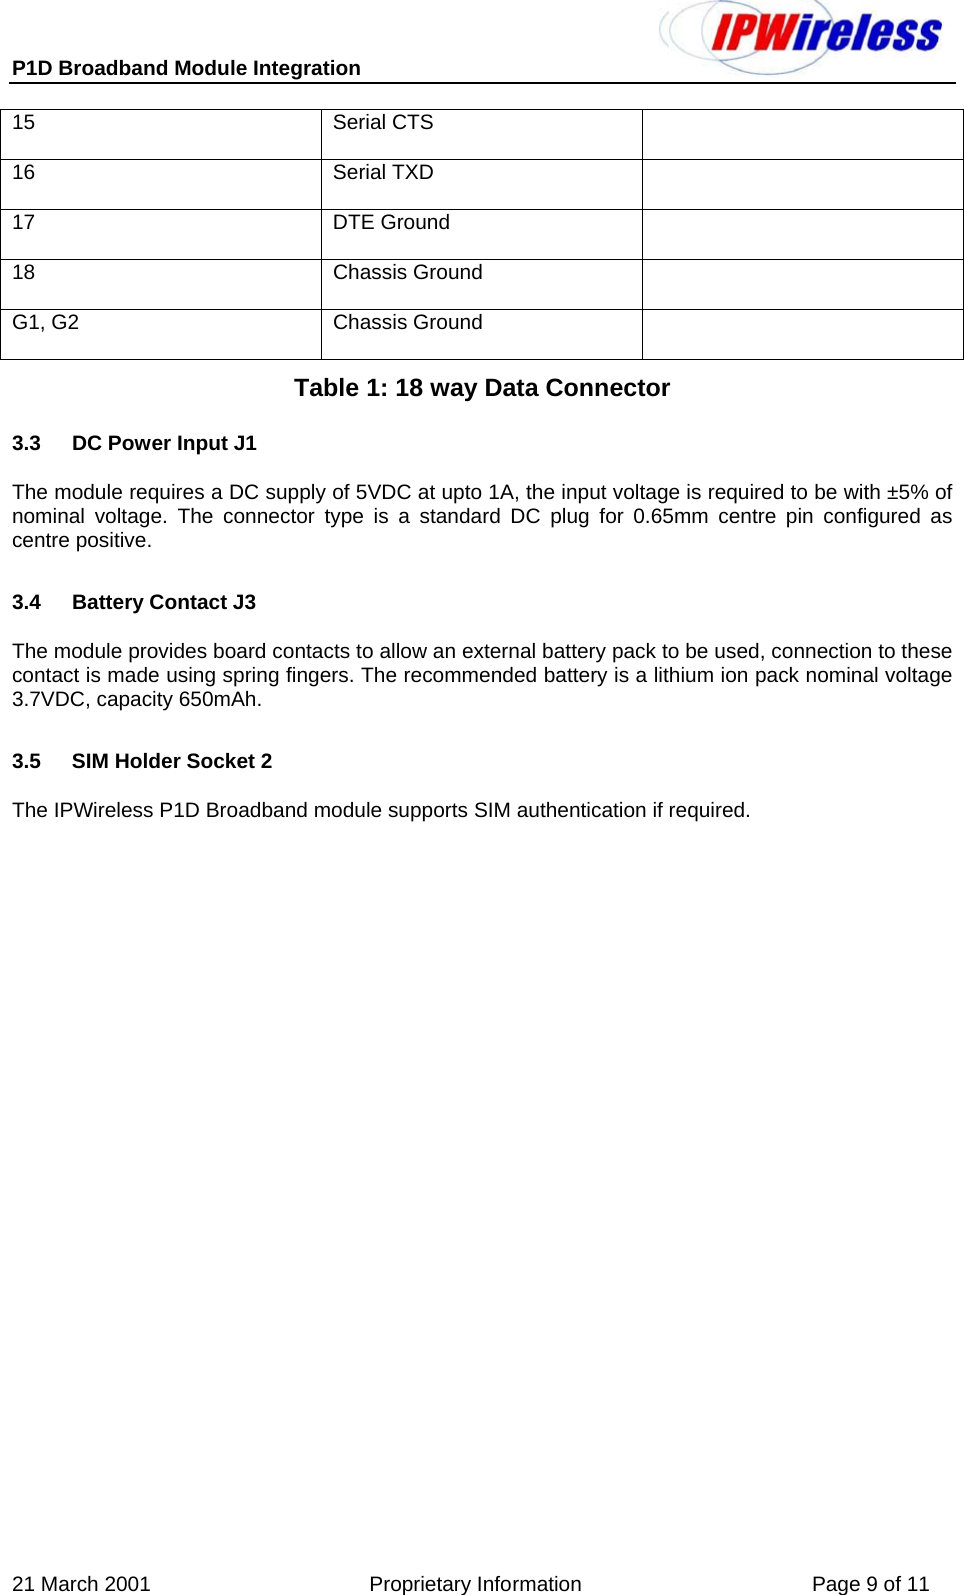 P1D Broadband Module Integration     21 March 2001                                      Proprietary Information                                        Page 9 of 11 15 Serial CTS  16 Serial TXD  17 DTE Ground  18  Chassis Ground    G1, G2  Chassis Ground   Table 1: 18 way Data Connector 3.3  DC Power Input J1 The module requires a DC supply of 5VDC at upto 1A, the input voltage is required to be with ±5% of nominal voltage. The connector type is a standard DC plug for 0.65mm centre pin configured as centre positive. 3.4  Battery Contact J3 The module provides board contacts to allow an external battery pack to be used, connection to these contact is made using spring fingers. The recommended battery is a lithium ion pack nominal voltage 3.7VDC, capacity 650mAh. 3.5  SIM Holder Socket 2 The IPWireless P1D Broadband module supports SIM authentication if required. 